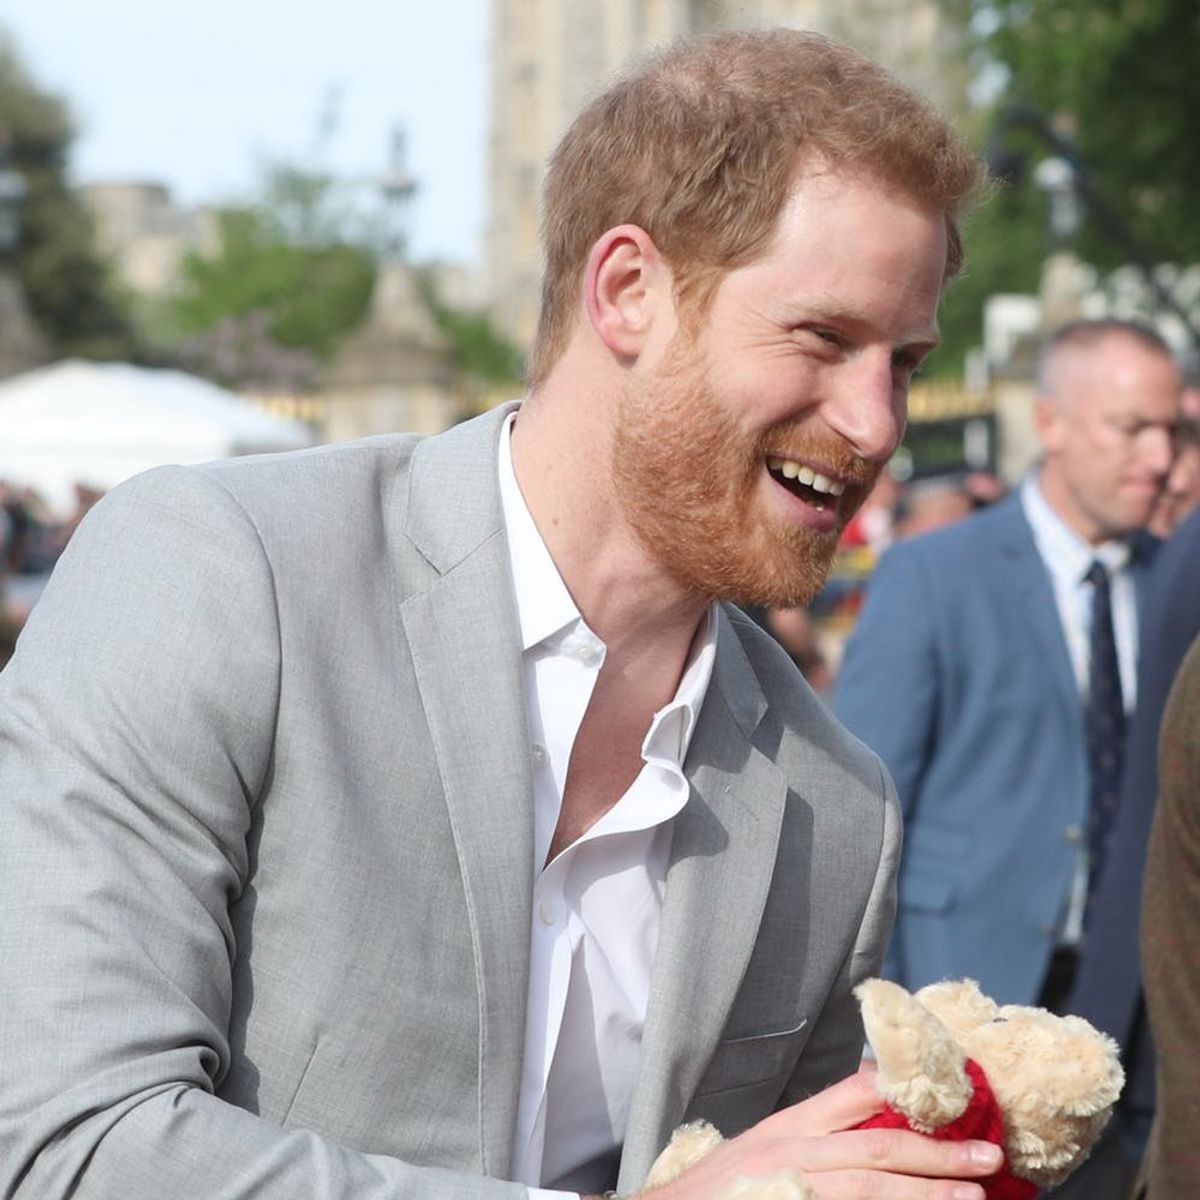 Prince Harry Is All Smiles as He Greets the Public Ahead of the Royal Wedding